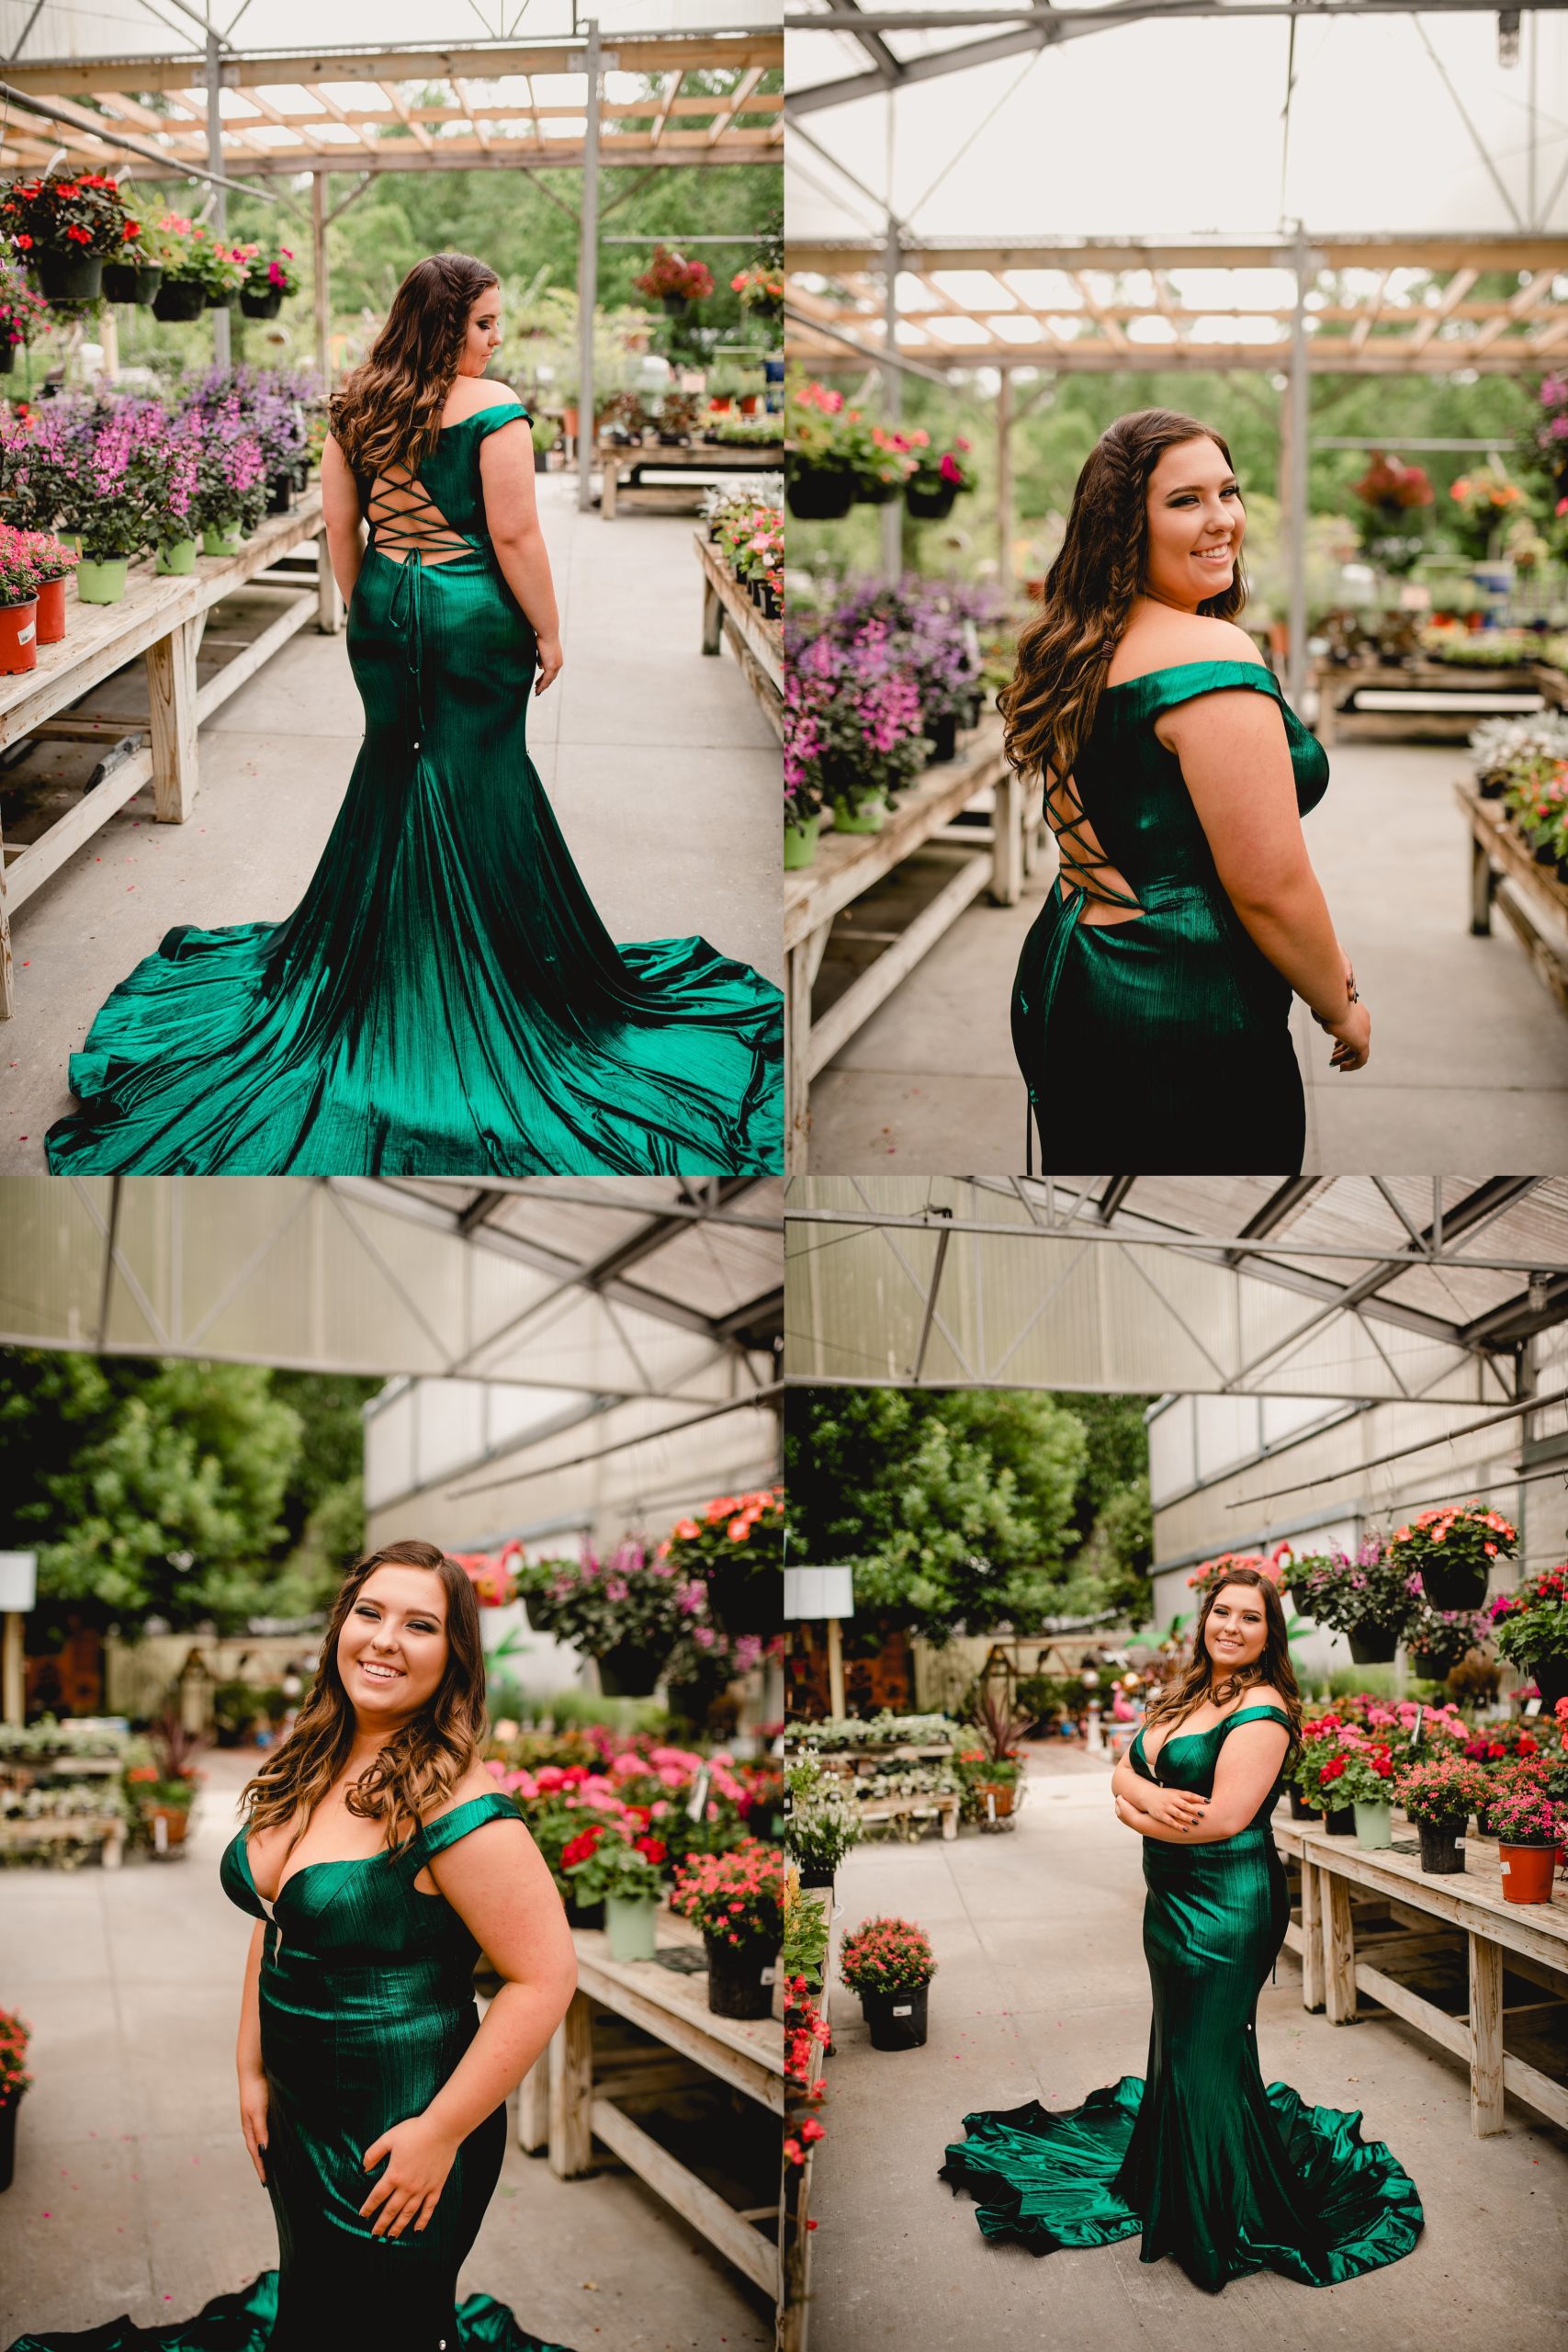 Prom photographer in North Florida takes photos at Nobles Greenhouse